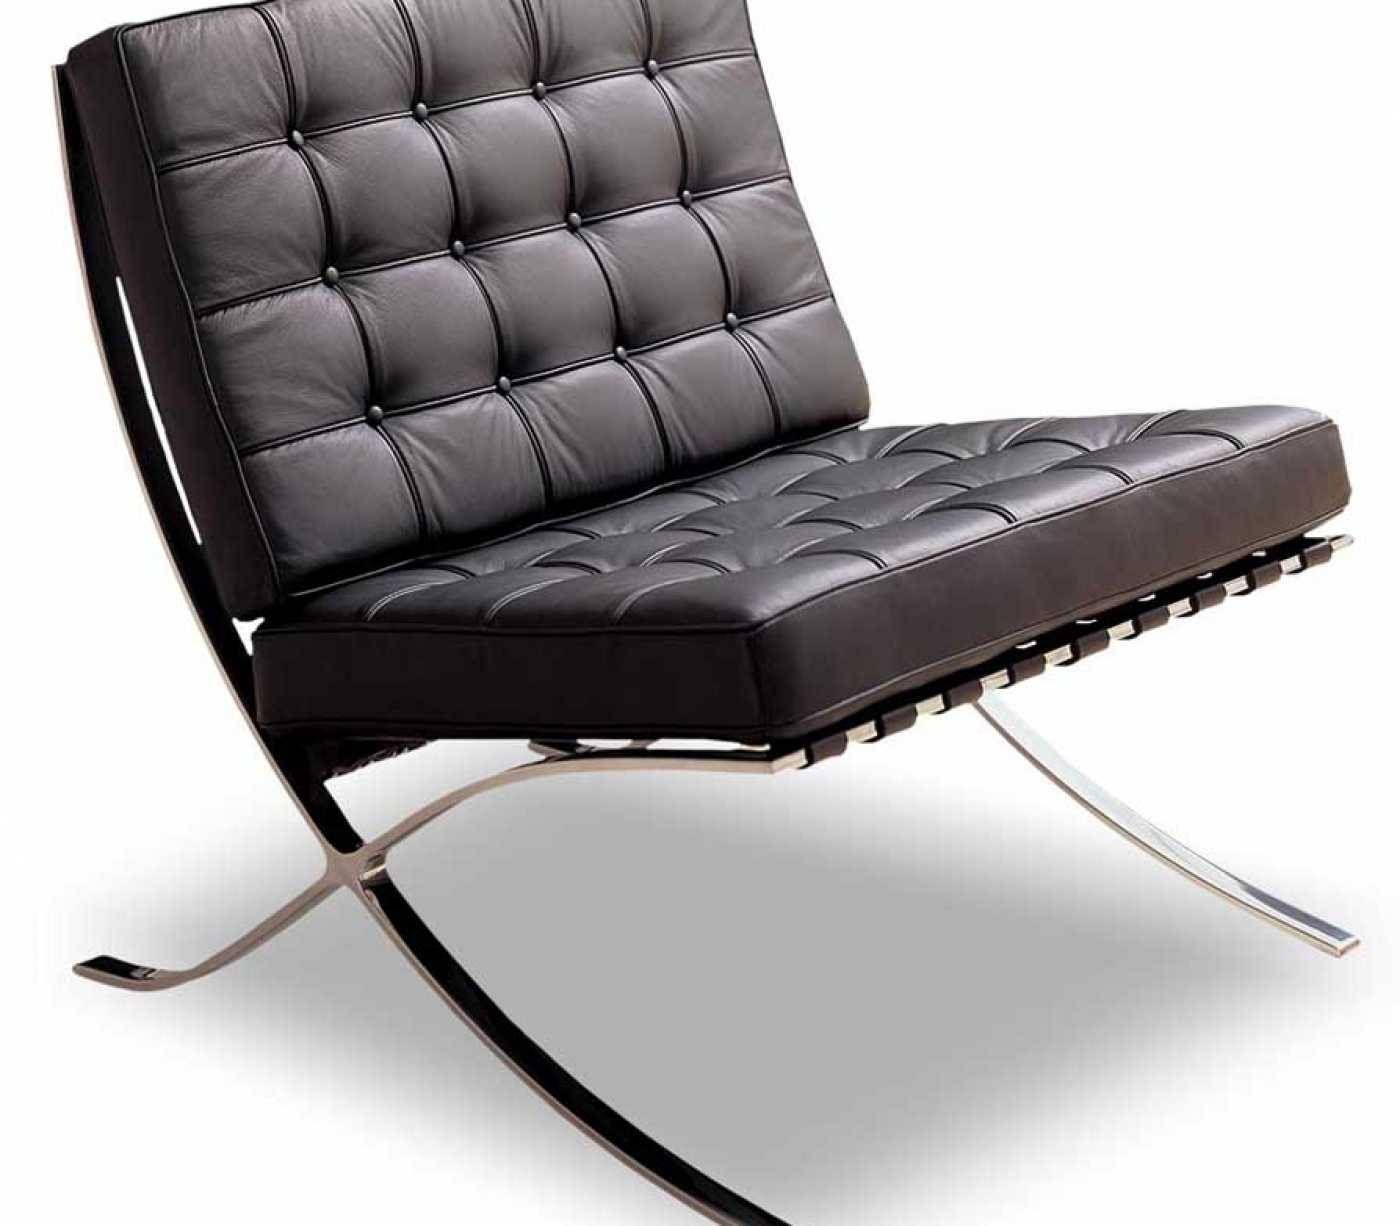 Contemporary Furniture Chairs, Contemporary Furniture Chairs Within Contemporary Sofa Chairs (View 7 of 15)